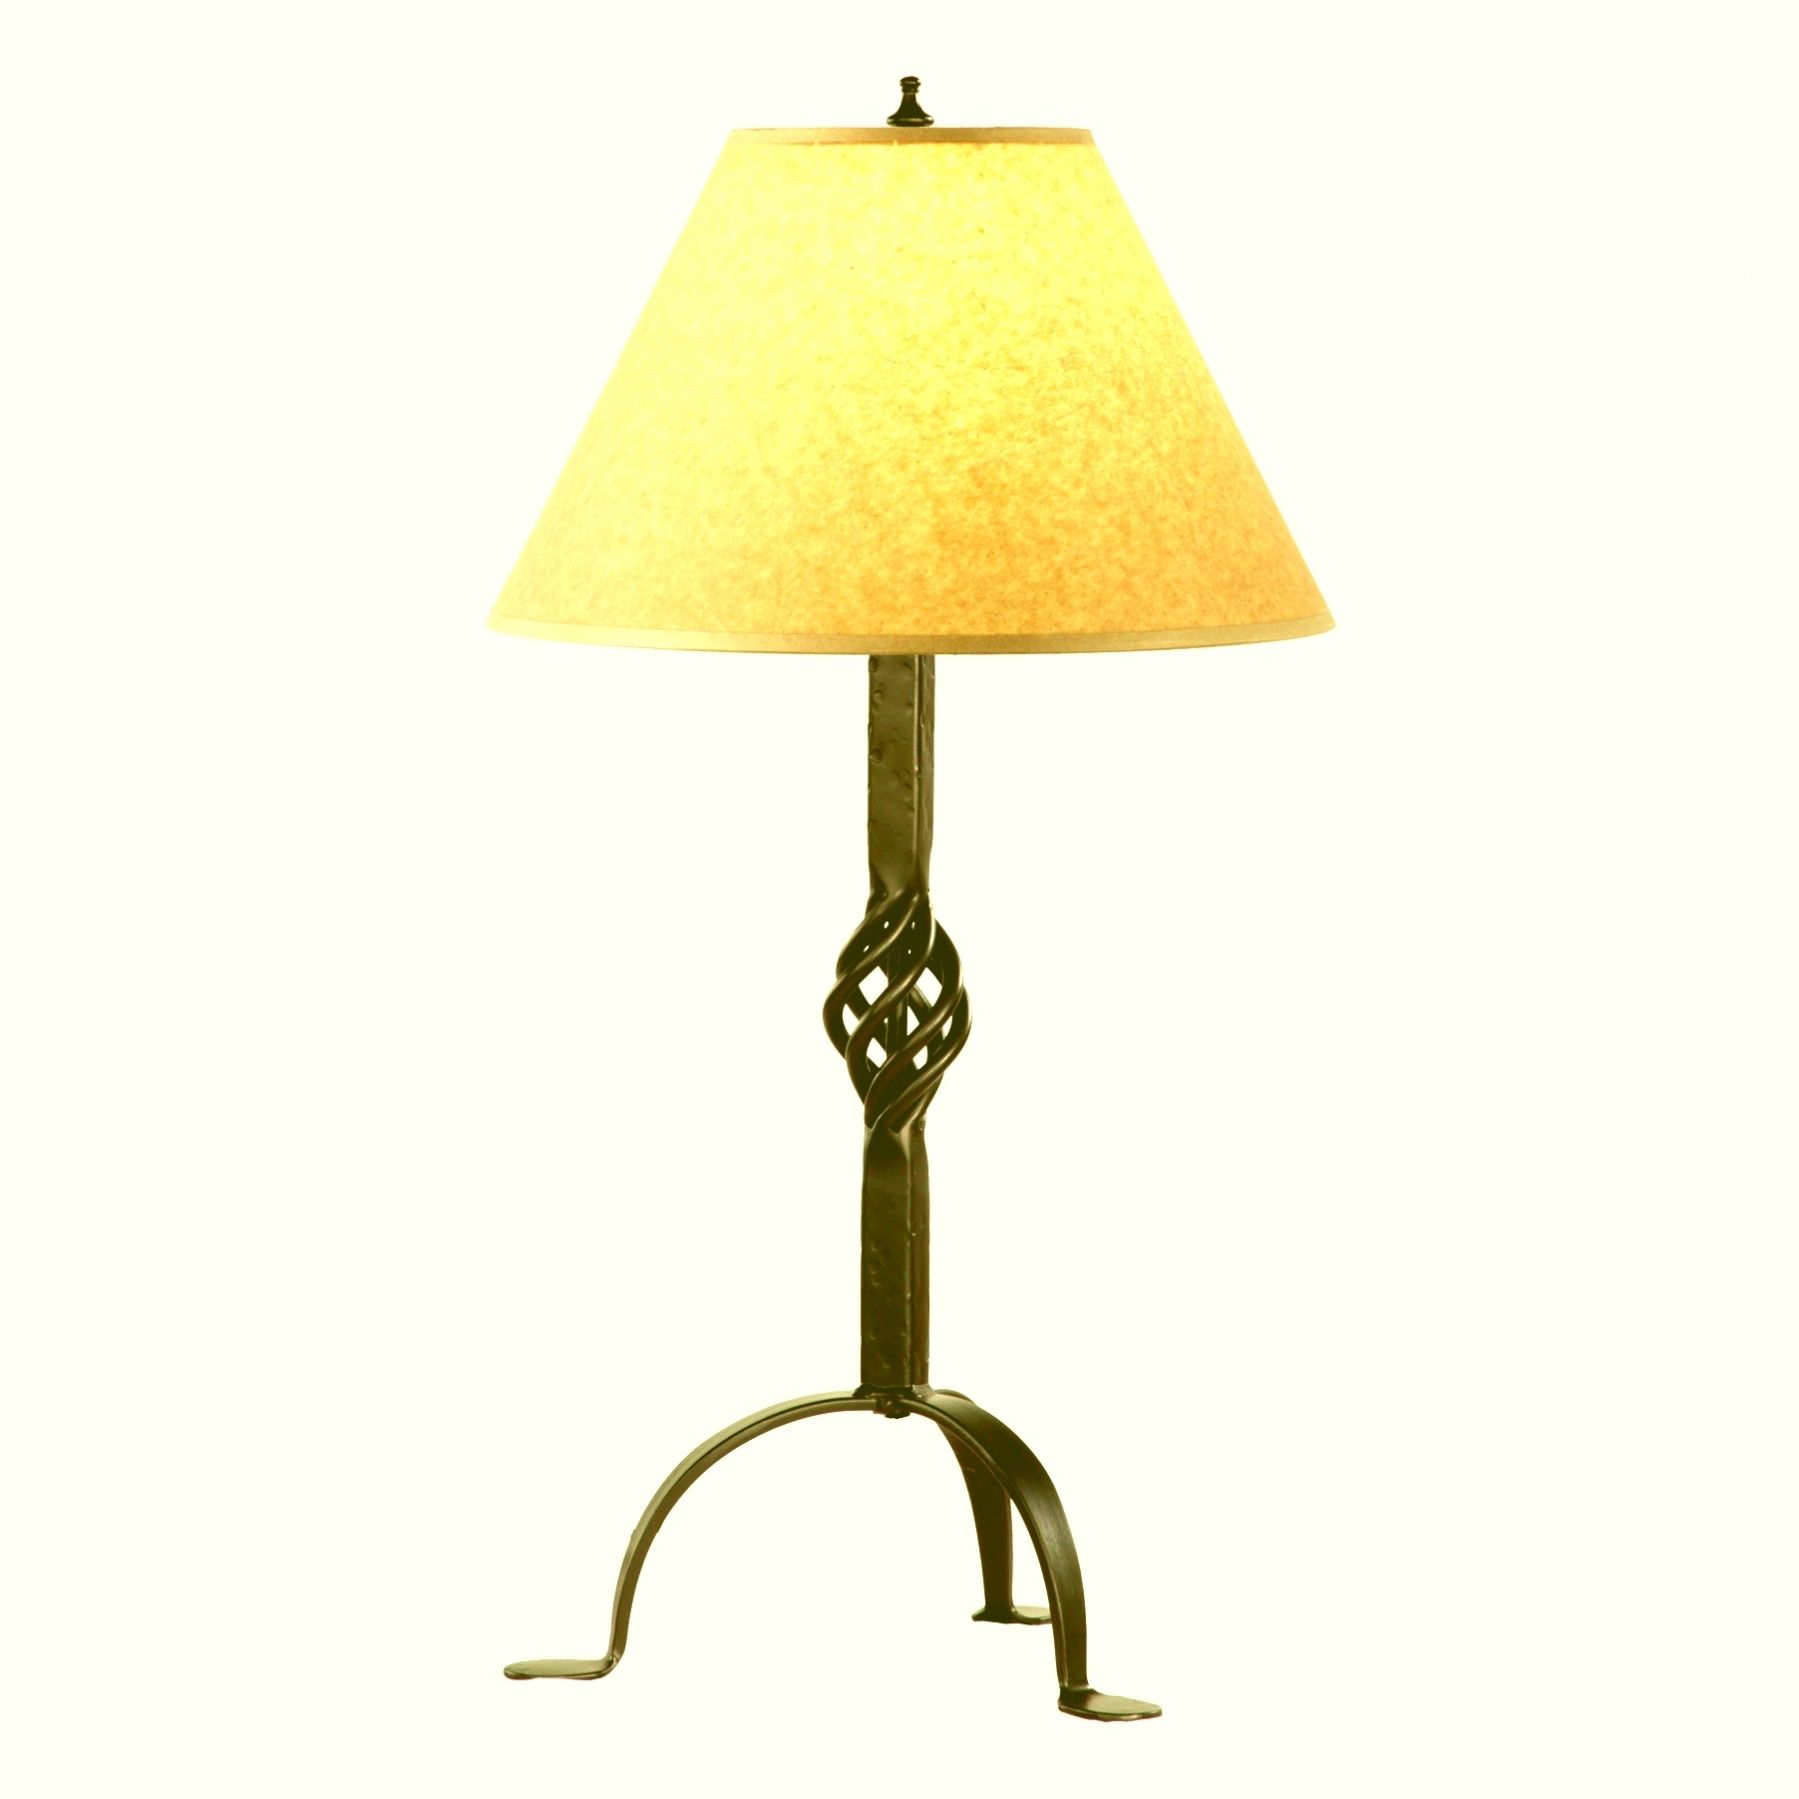 Wrought Iron Living Room Table Lamps For Popular Wrought Iron Table Lamps Living Room – Home Decorating Ideas (View 2 of 15)